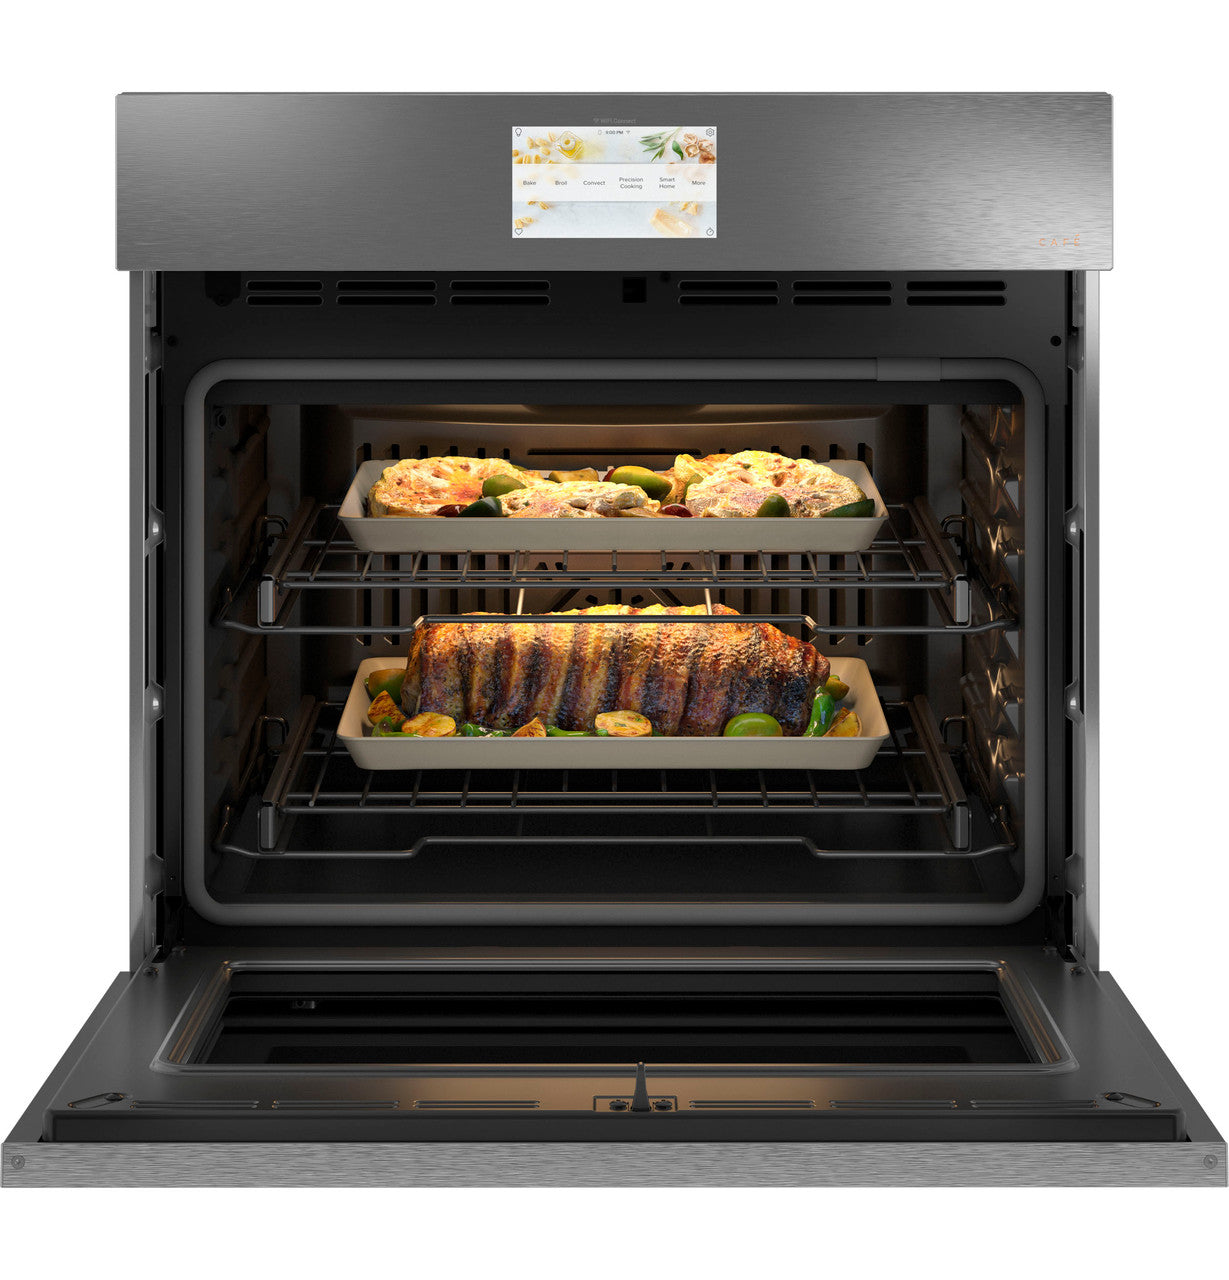 Café - 5 cu. ft Single Wall Oven in Platinum Glass - CTS90DM2NS5